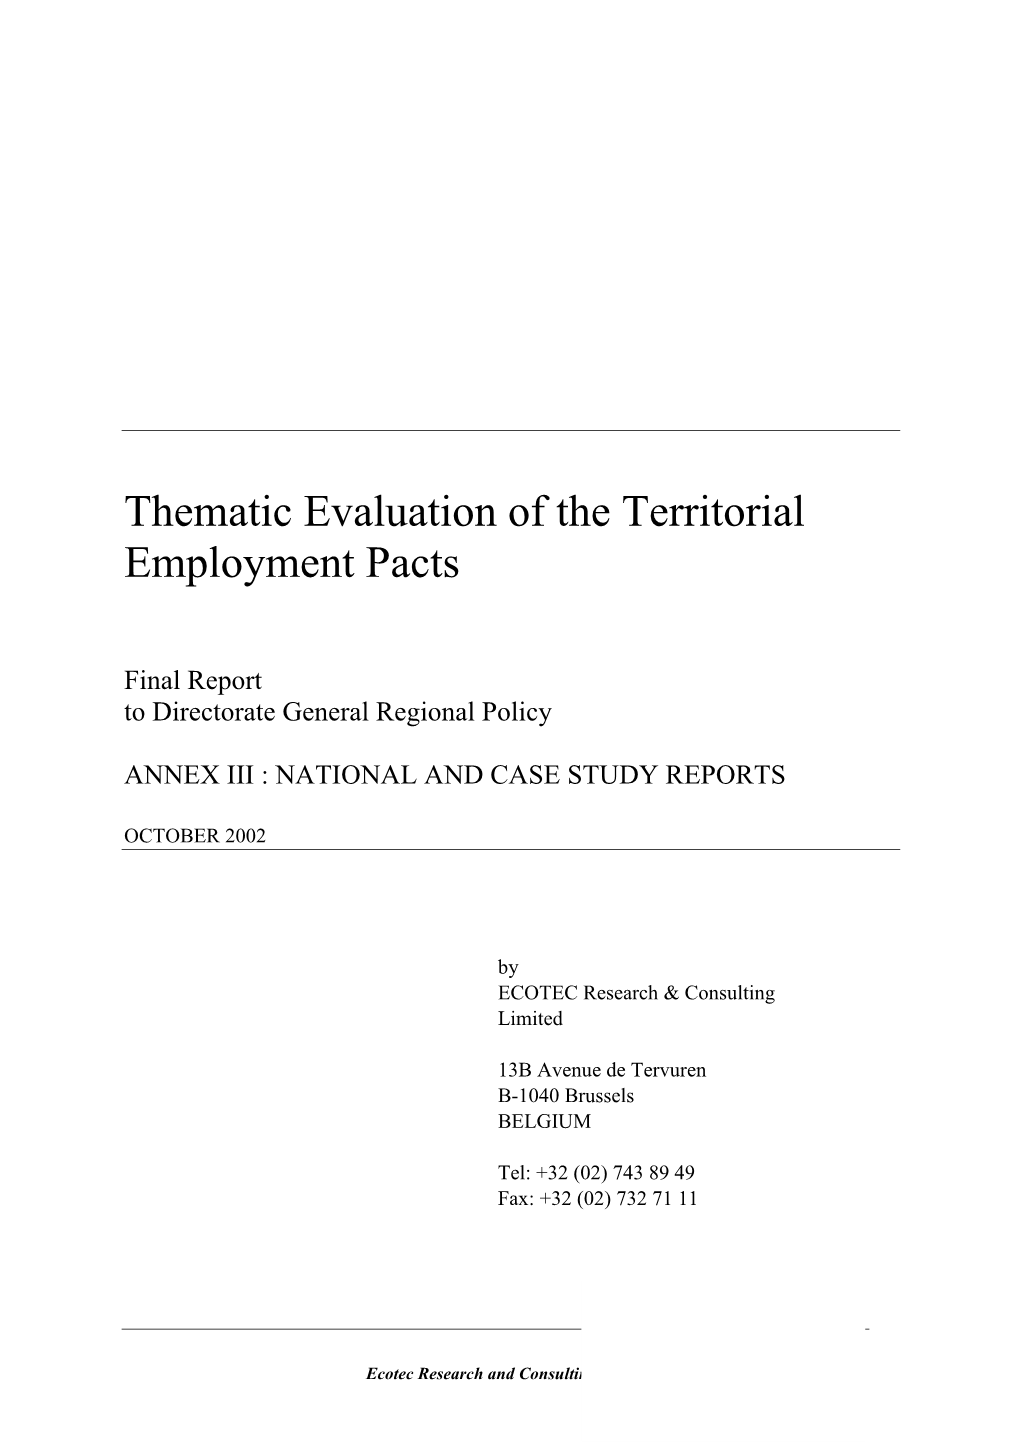 Thematic Evaluation of the Territorial Employment Pacts